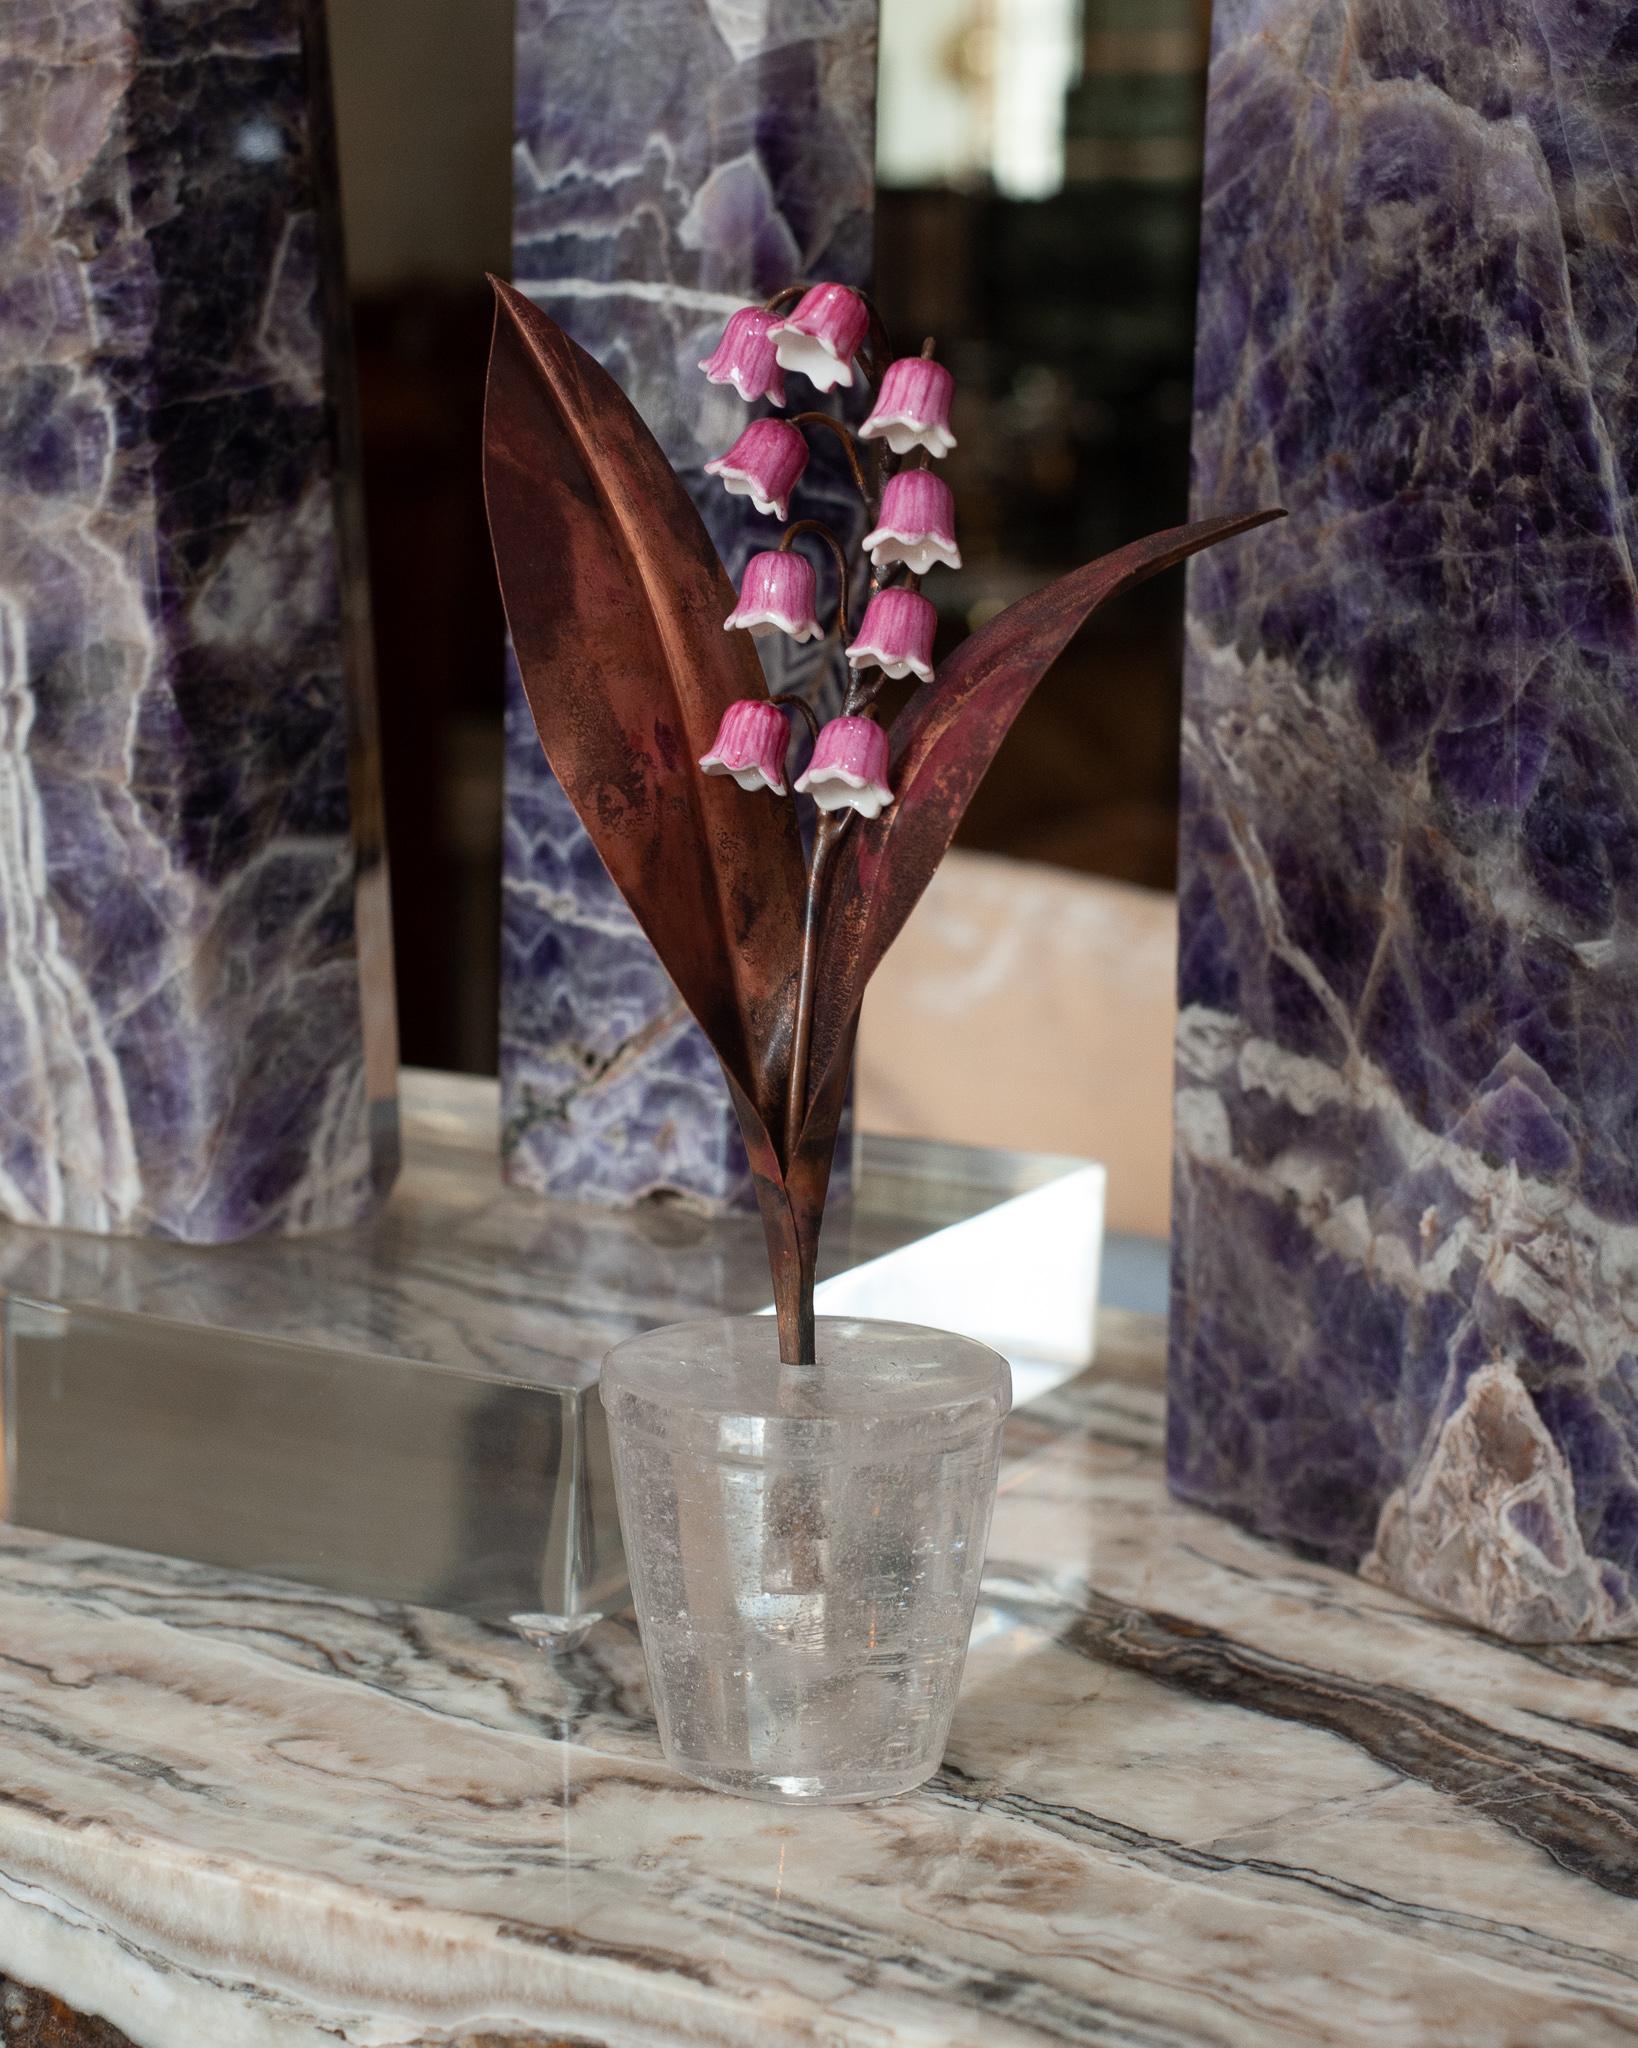 Enhance your table with these delicate porcelain flowers by French artist Samuel Mazy, in collaboration with Maison Nurita. This Lily of the Valley is handmade in biscuit porcelain, glazed in a custom pink for Maison Nurita, with patinated copper